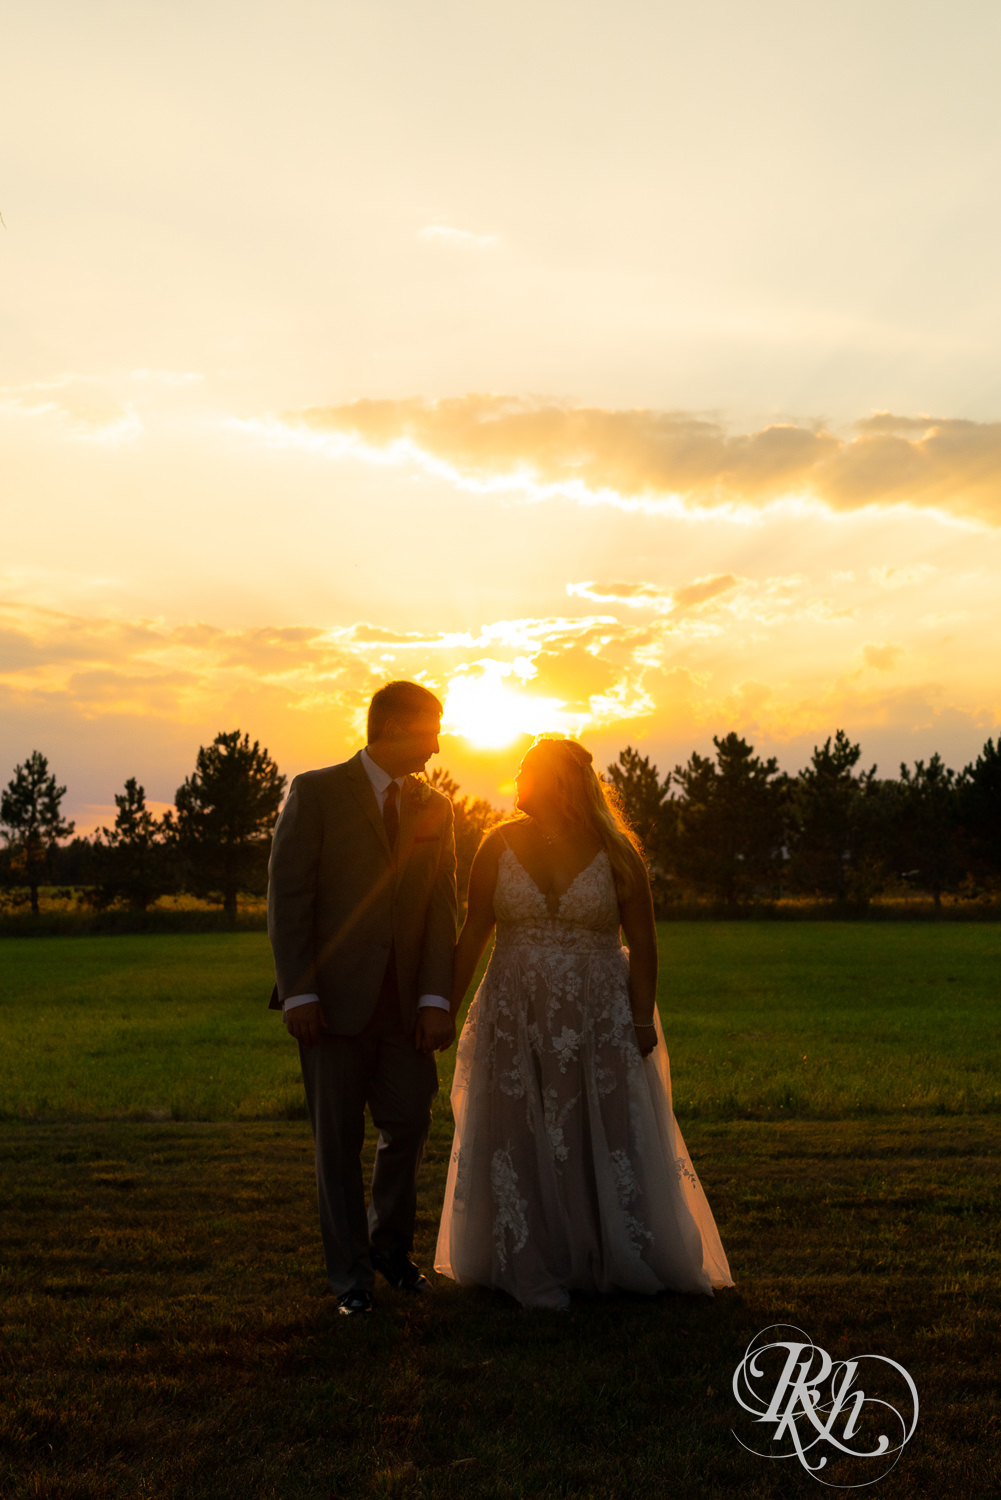 Bride and groom walking during sunset